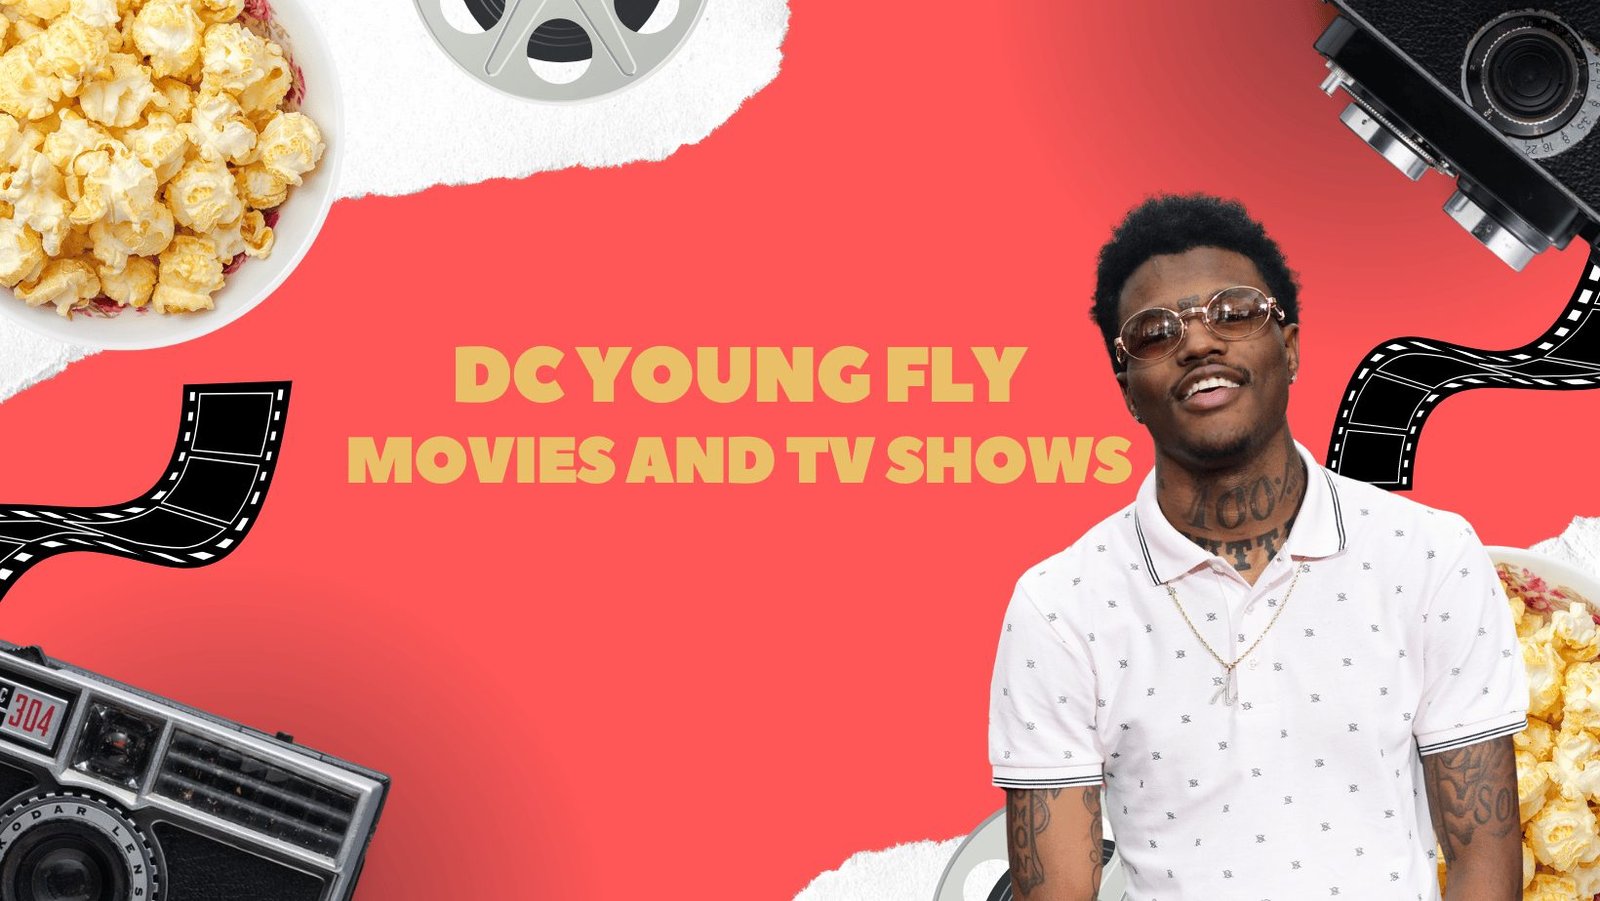 DC Young Fly Movies and TV Shows